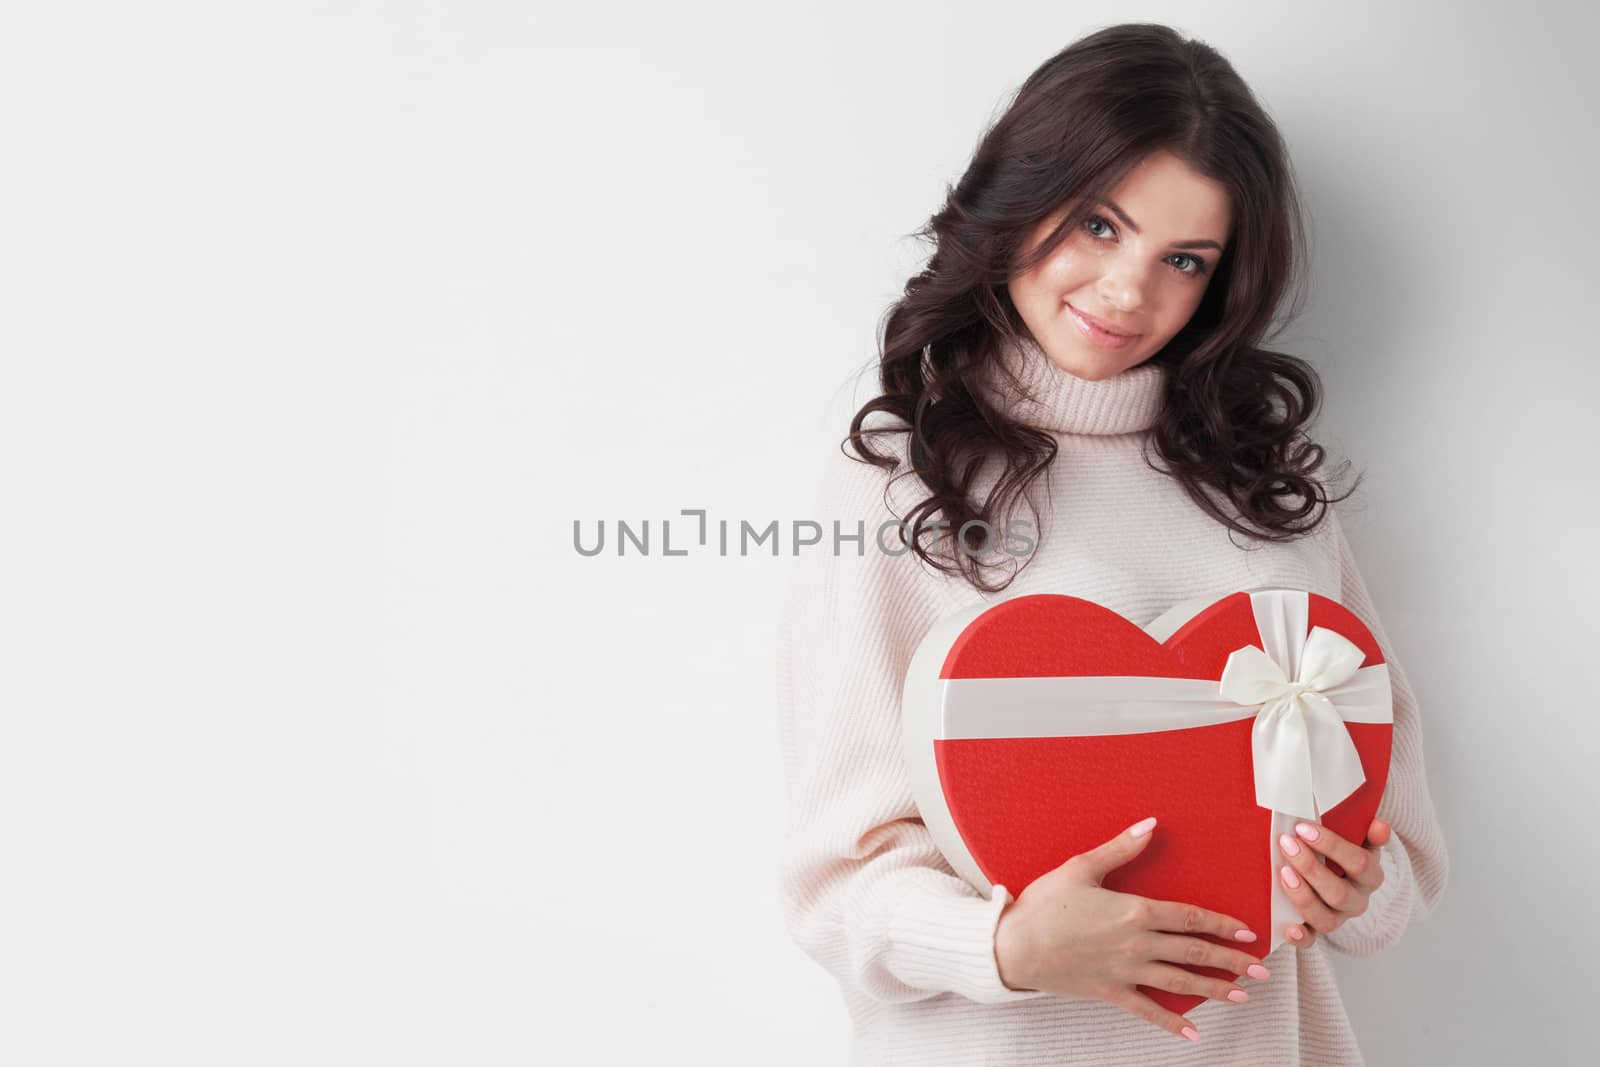 Young girl with red heart-shaped gift box on white background